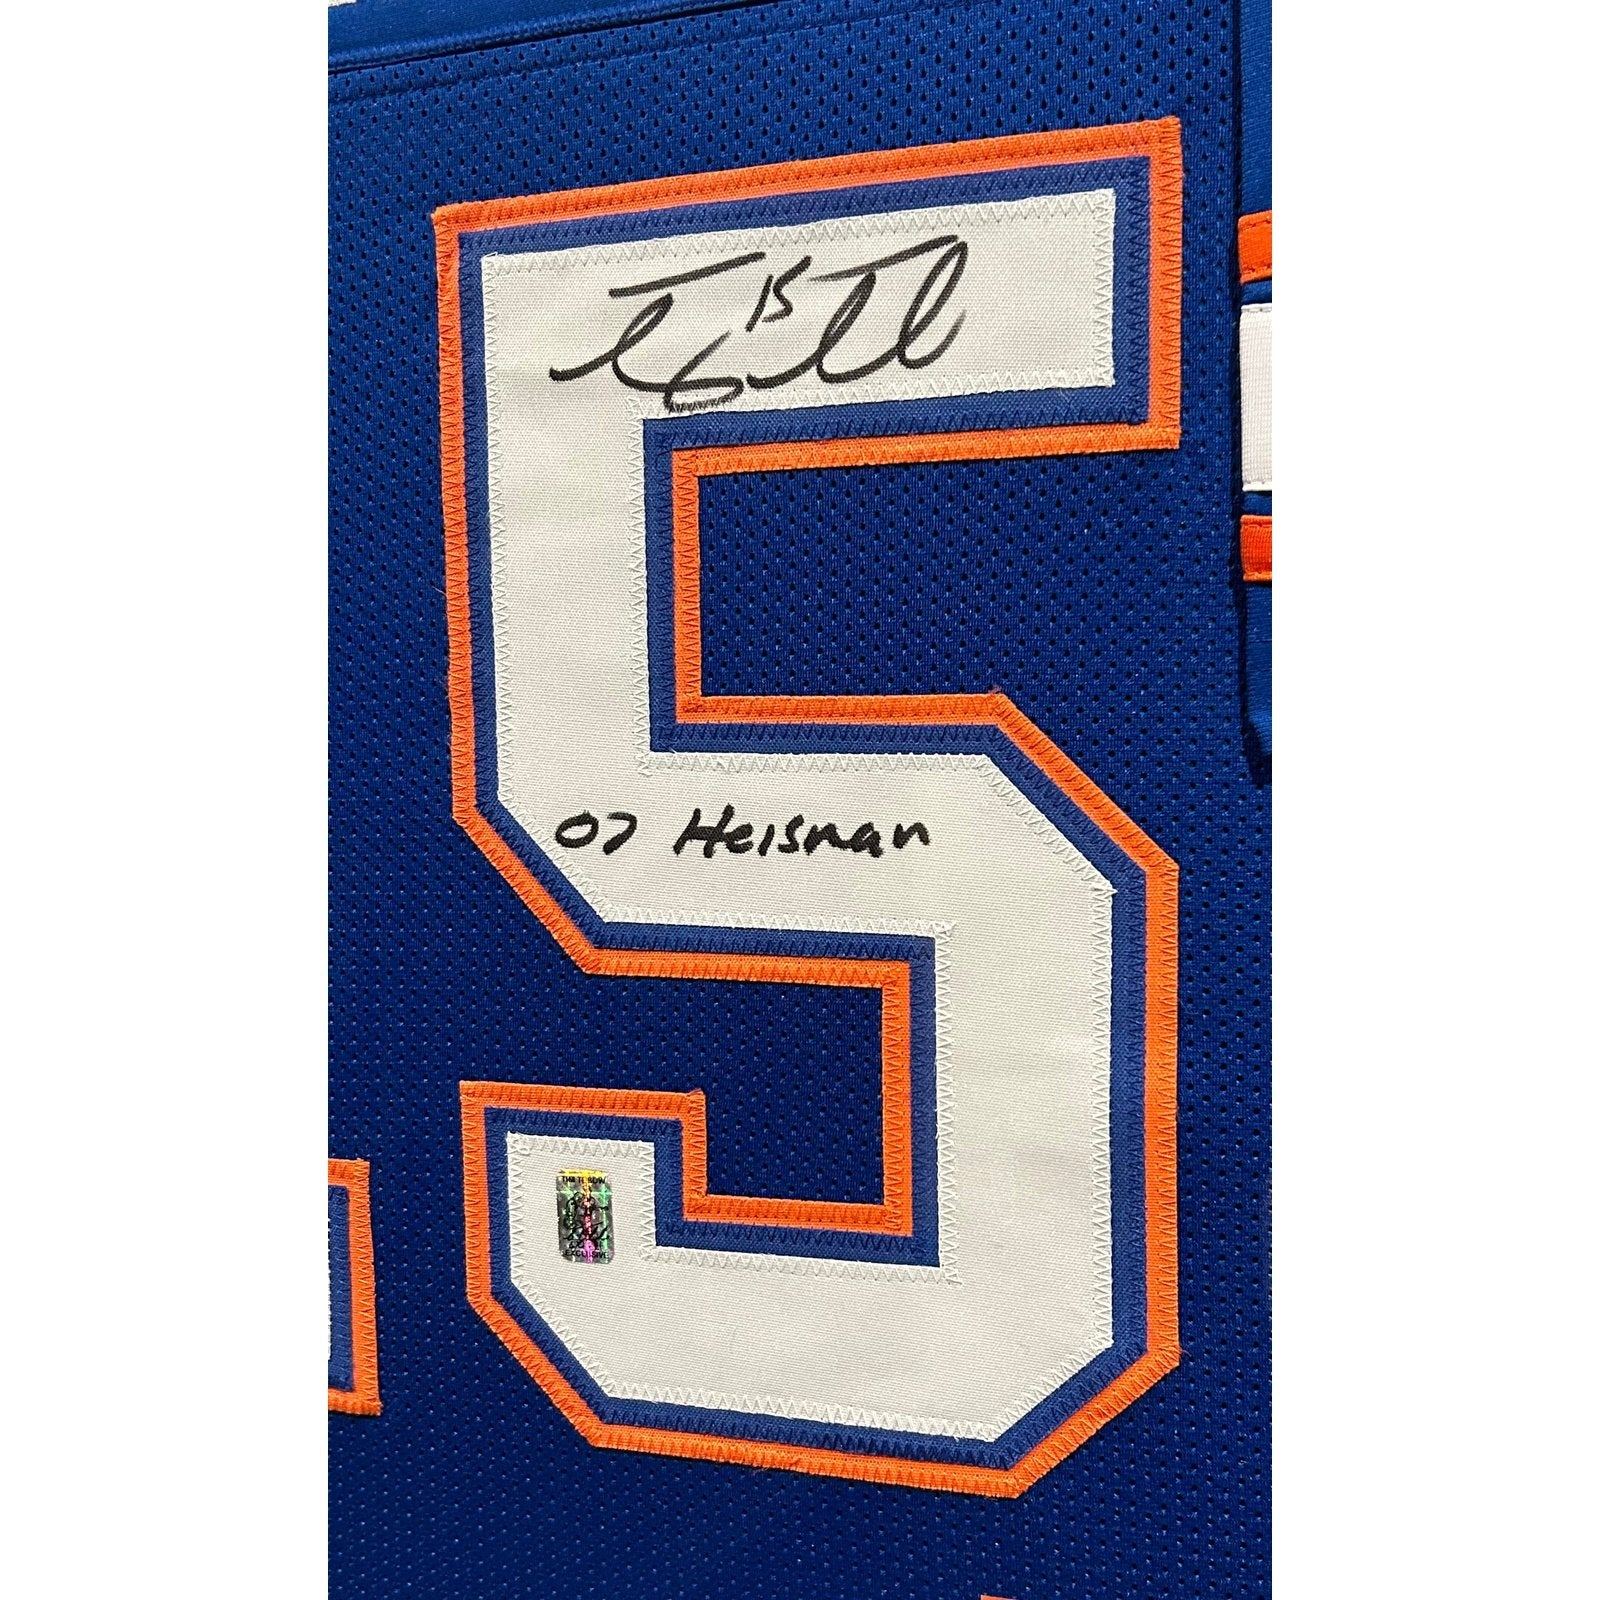 tebow autographed jersey